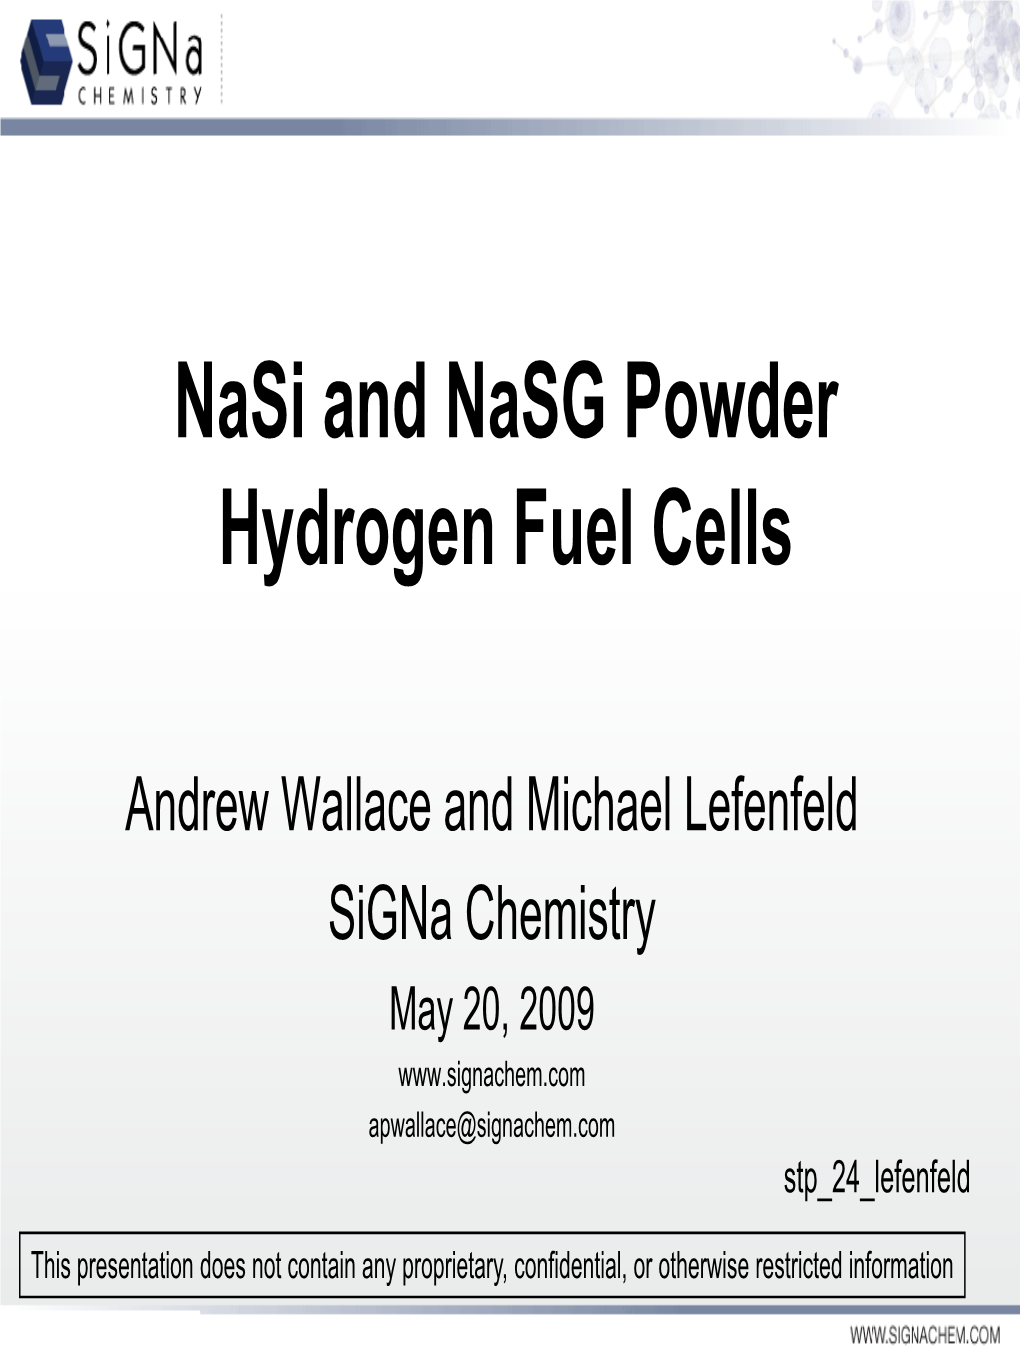 Nasi and Nasg Powder Hydrogen Fuel Cells